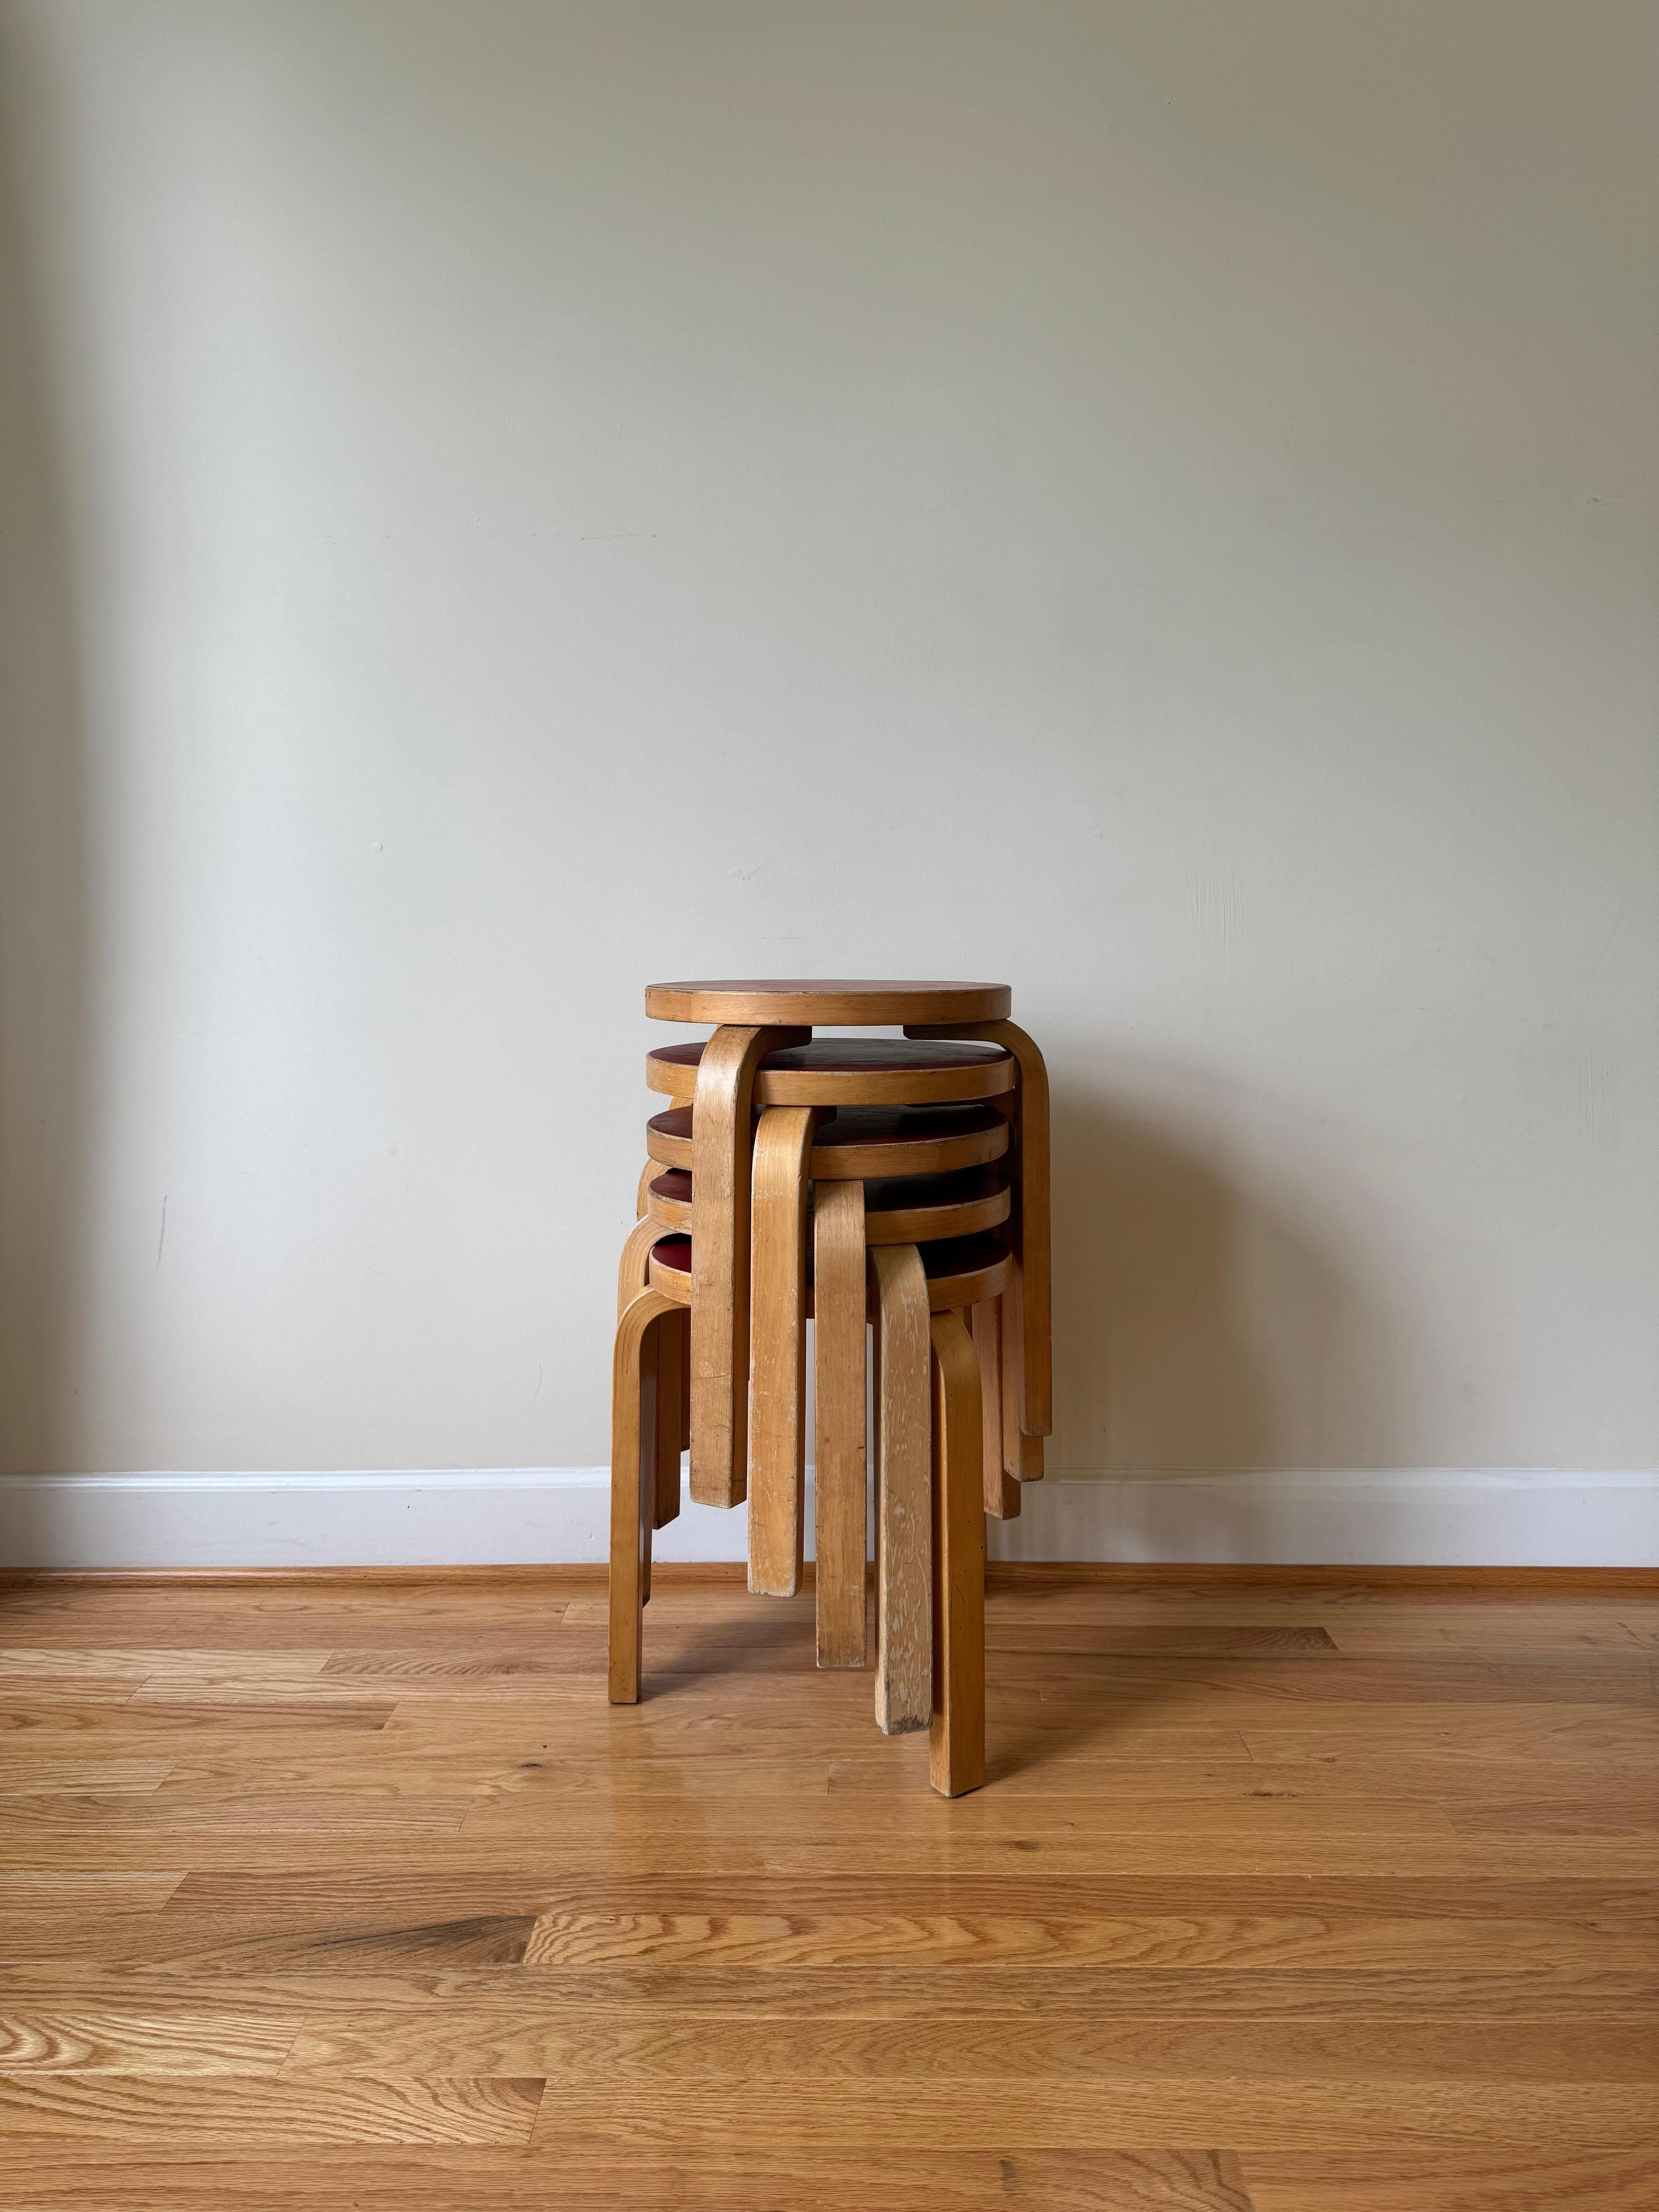 1960s models with four slits and five slits in the L-legs.
Date of Manufacture: circa 1960s

Alvar Aalto's iconic Stool 60 is the most elemental of furniture pieces, equally suitable as a seat, a table, storage unit, or display surface. 
Born of